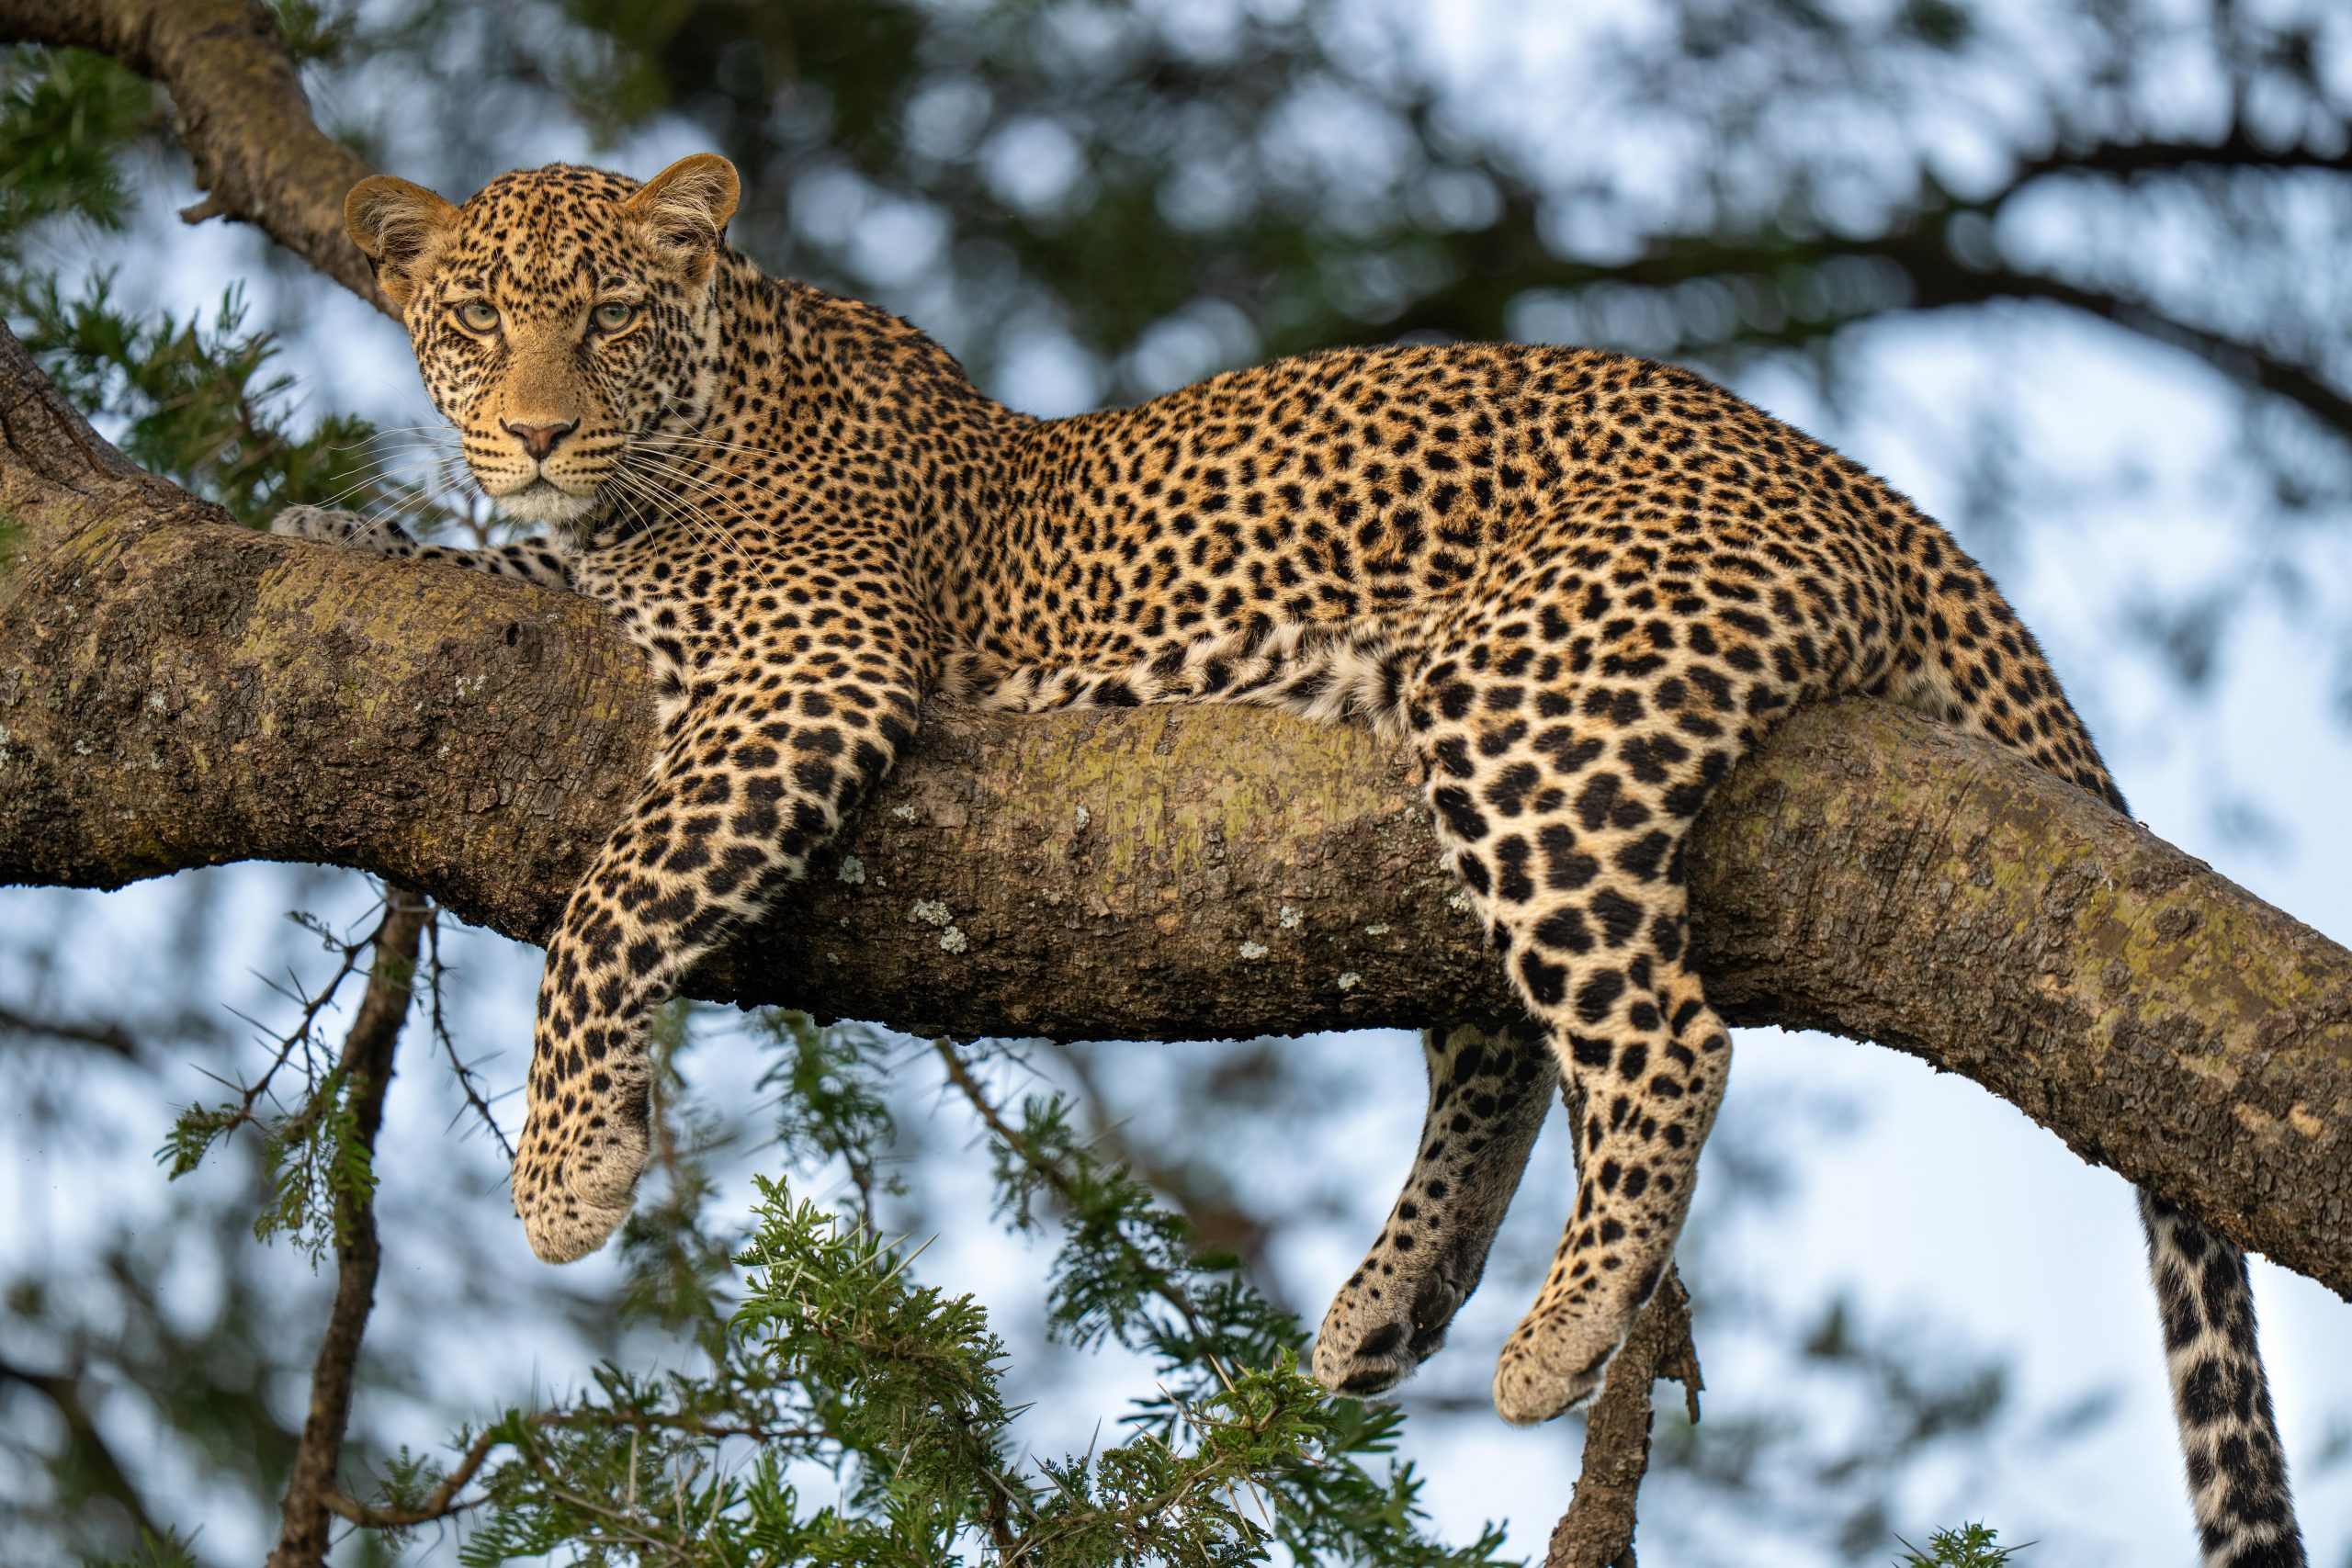 Should Leopards Be Paid for Their Spots?